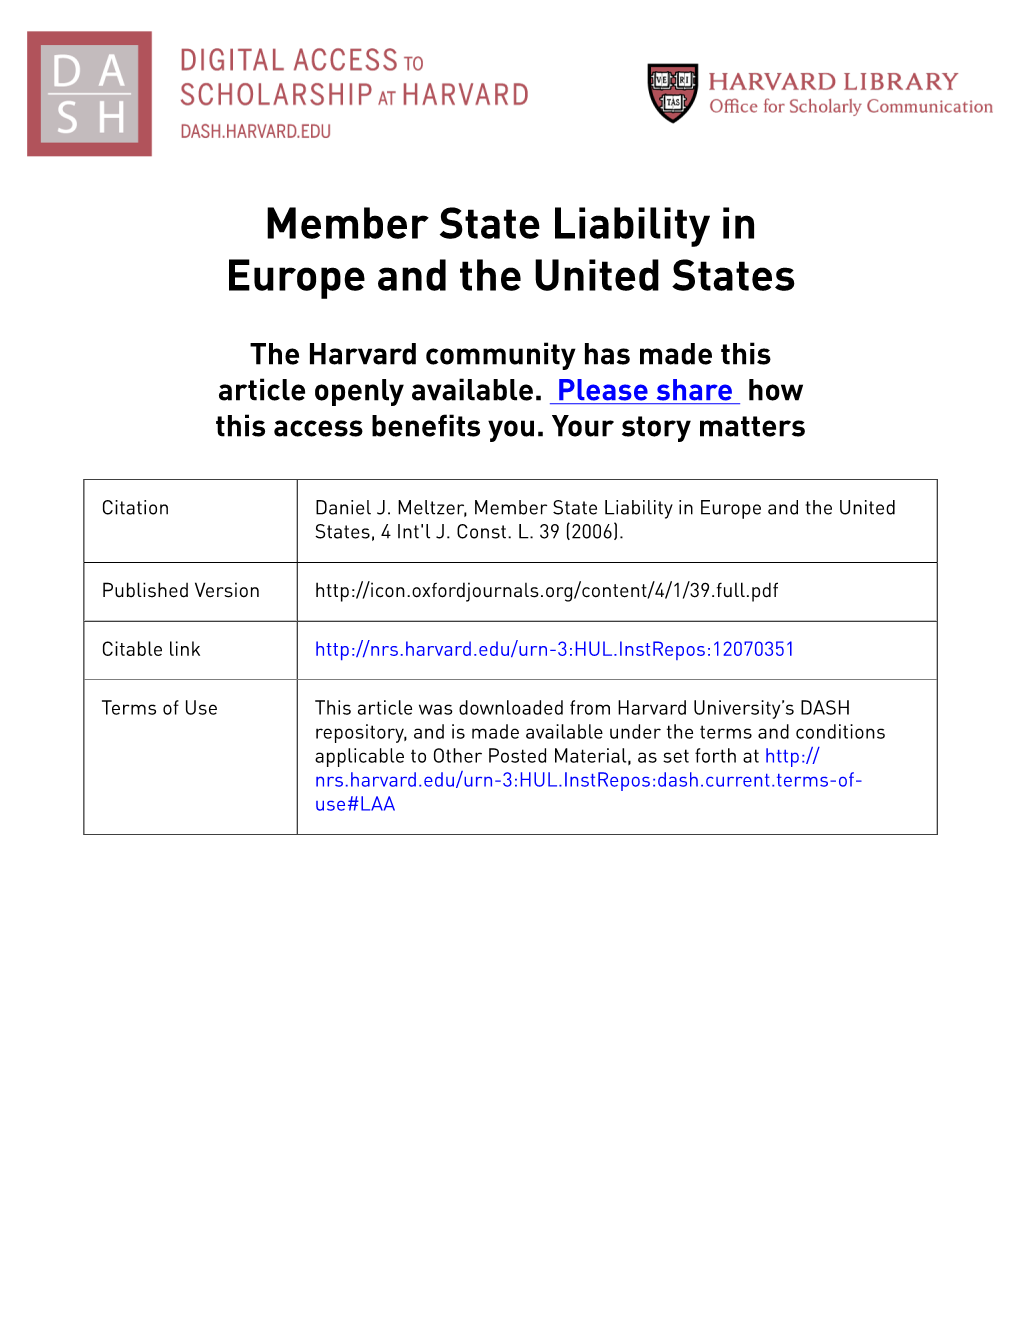 Member State Liability in Europe and the United States